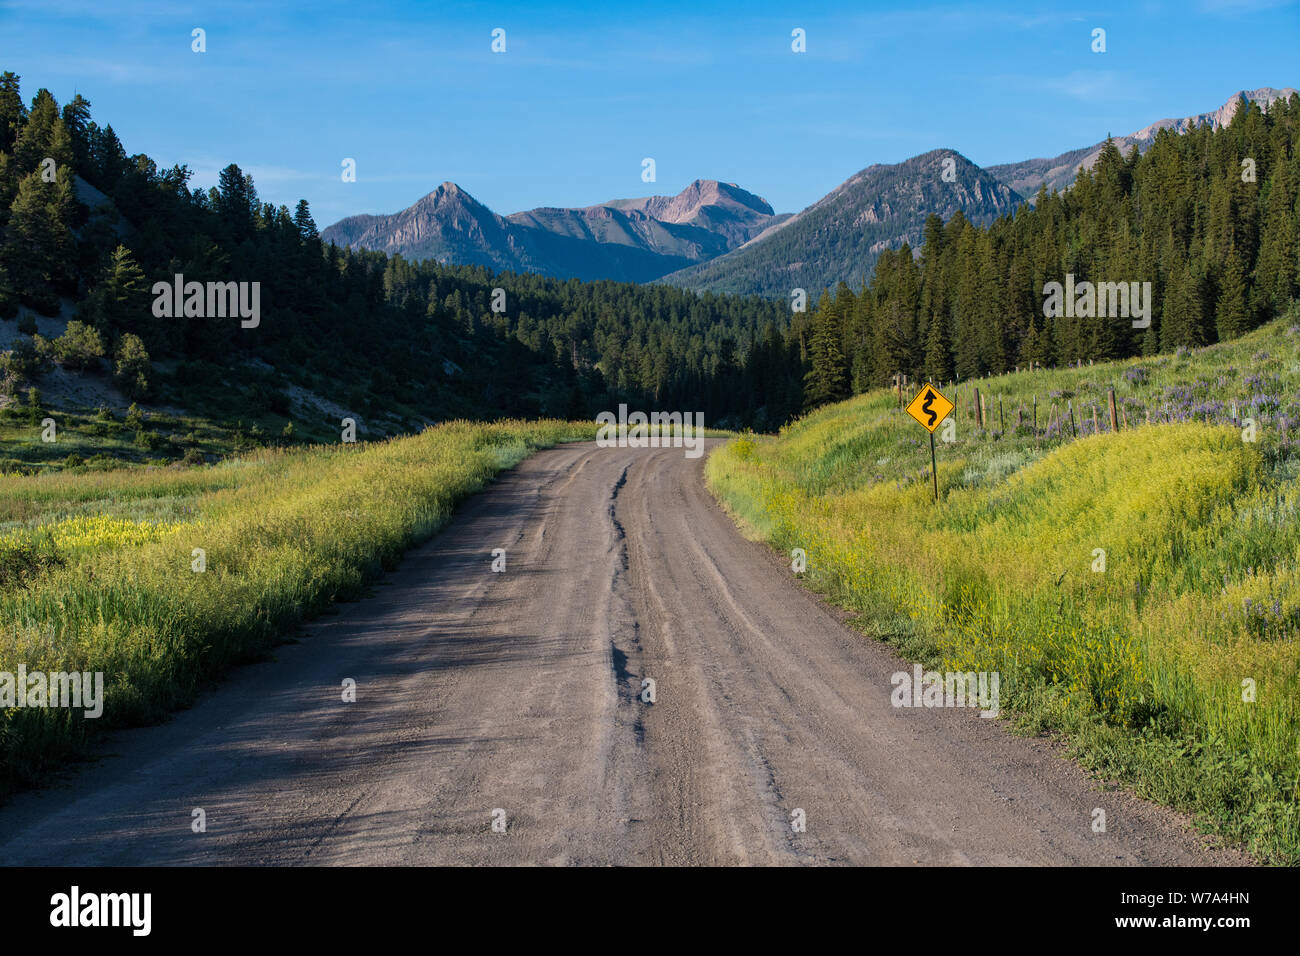 A dirt road with a yellow curved road sign curves through wildflowers towards high mountain peaks in the Rocky Mountains near Pagosa Springs, Colorado Stock Photo